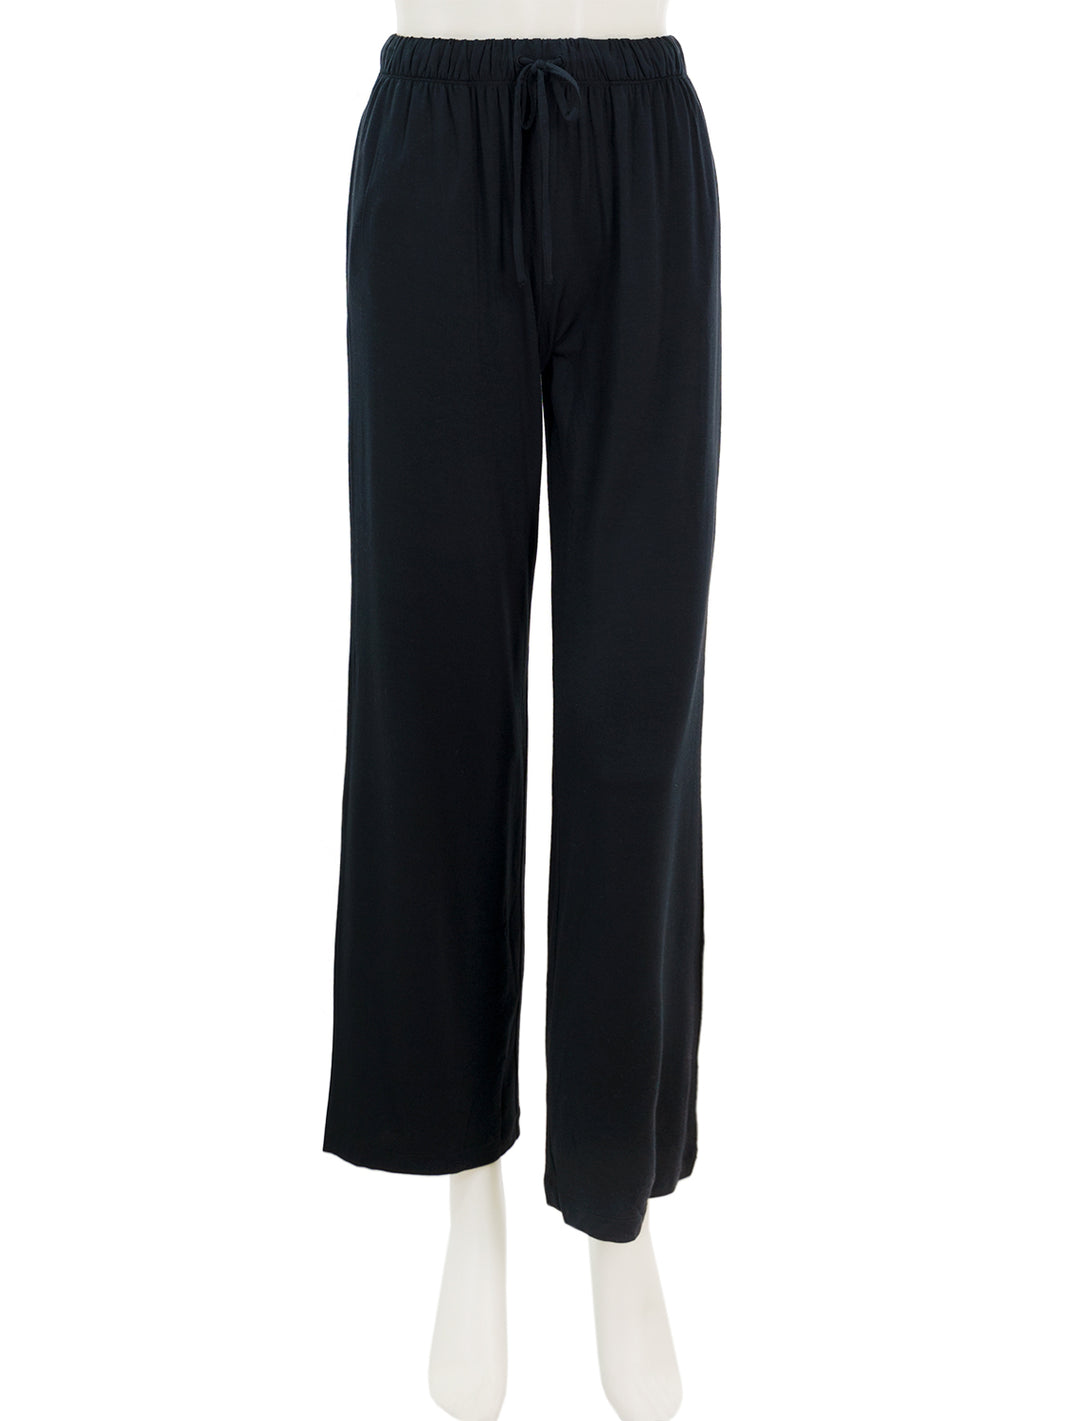 Front view of Eberjey's gisele everyday pant in black.